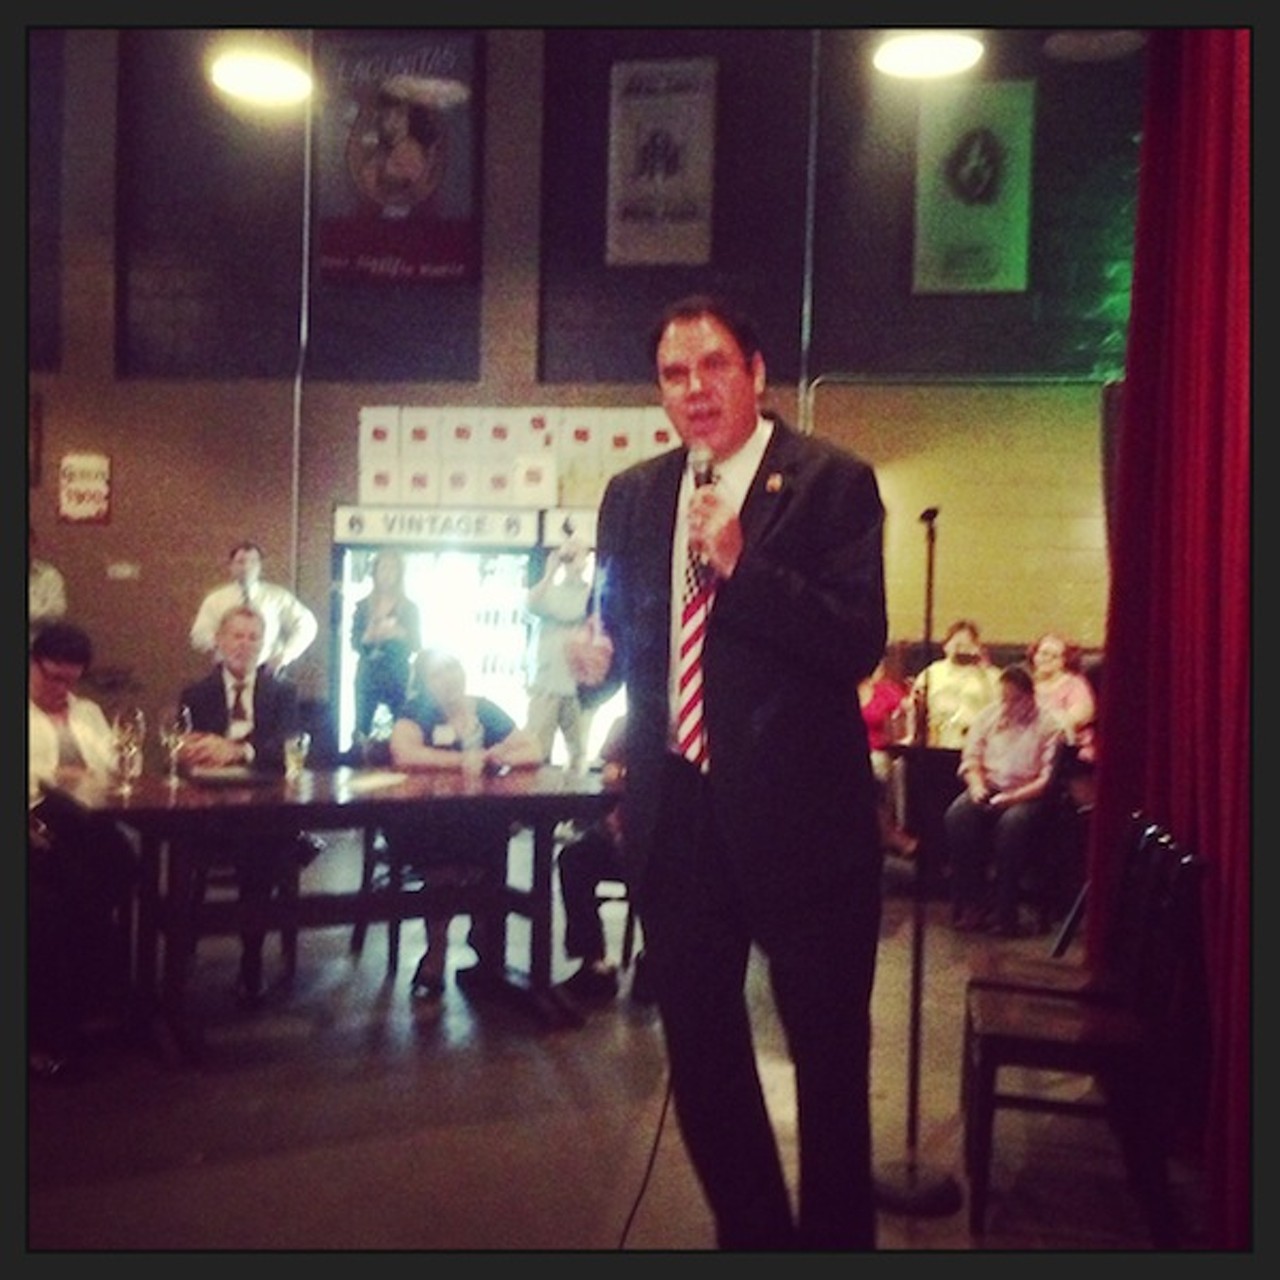 Alan Grayson was the guest speaker at the Orange County Dems' Speak Easy event at Redlight Redlight.